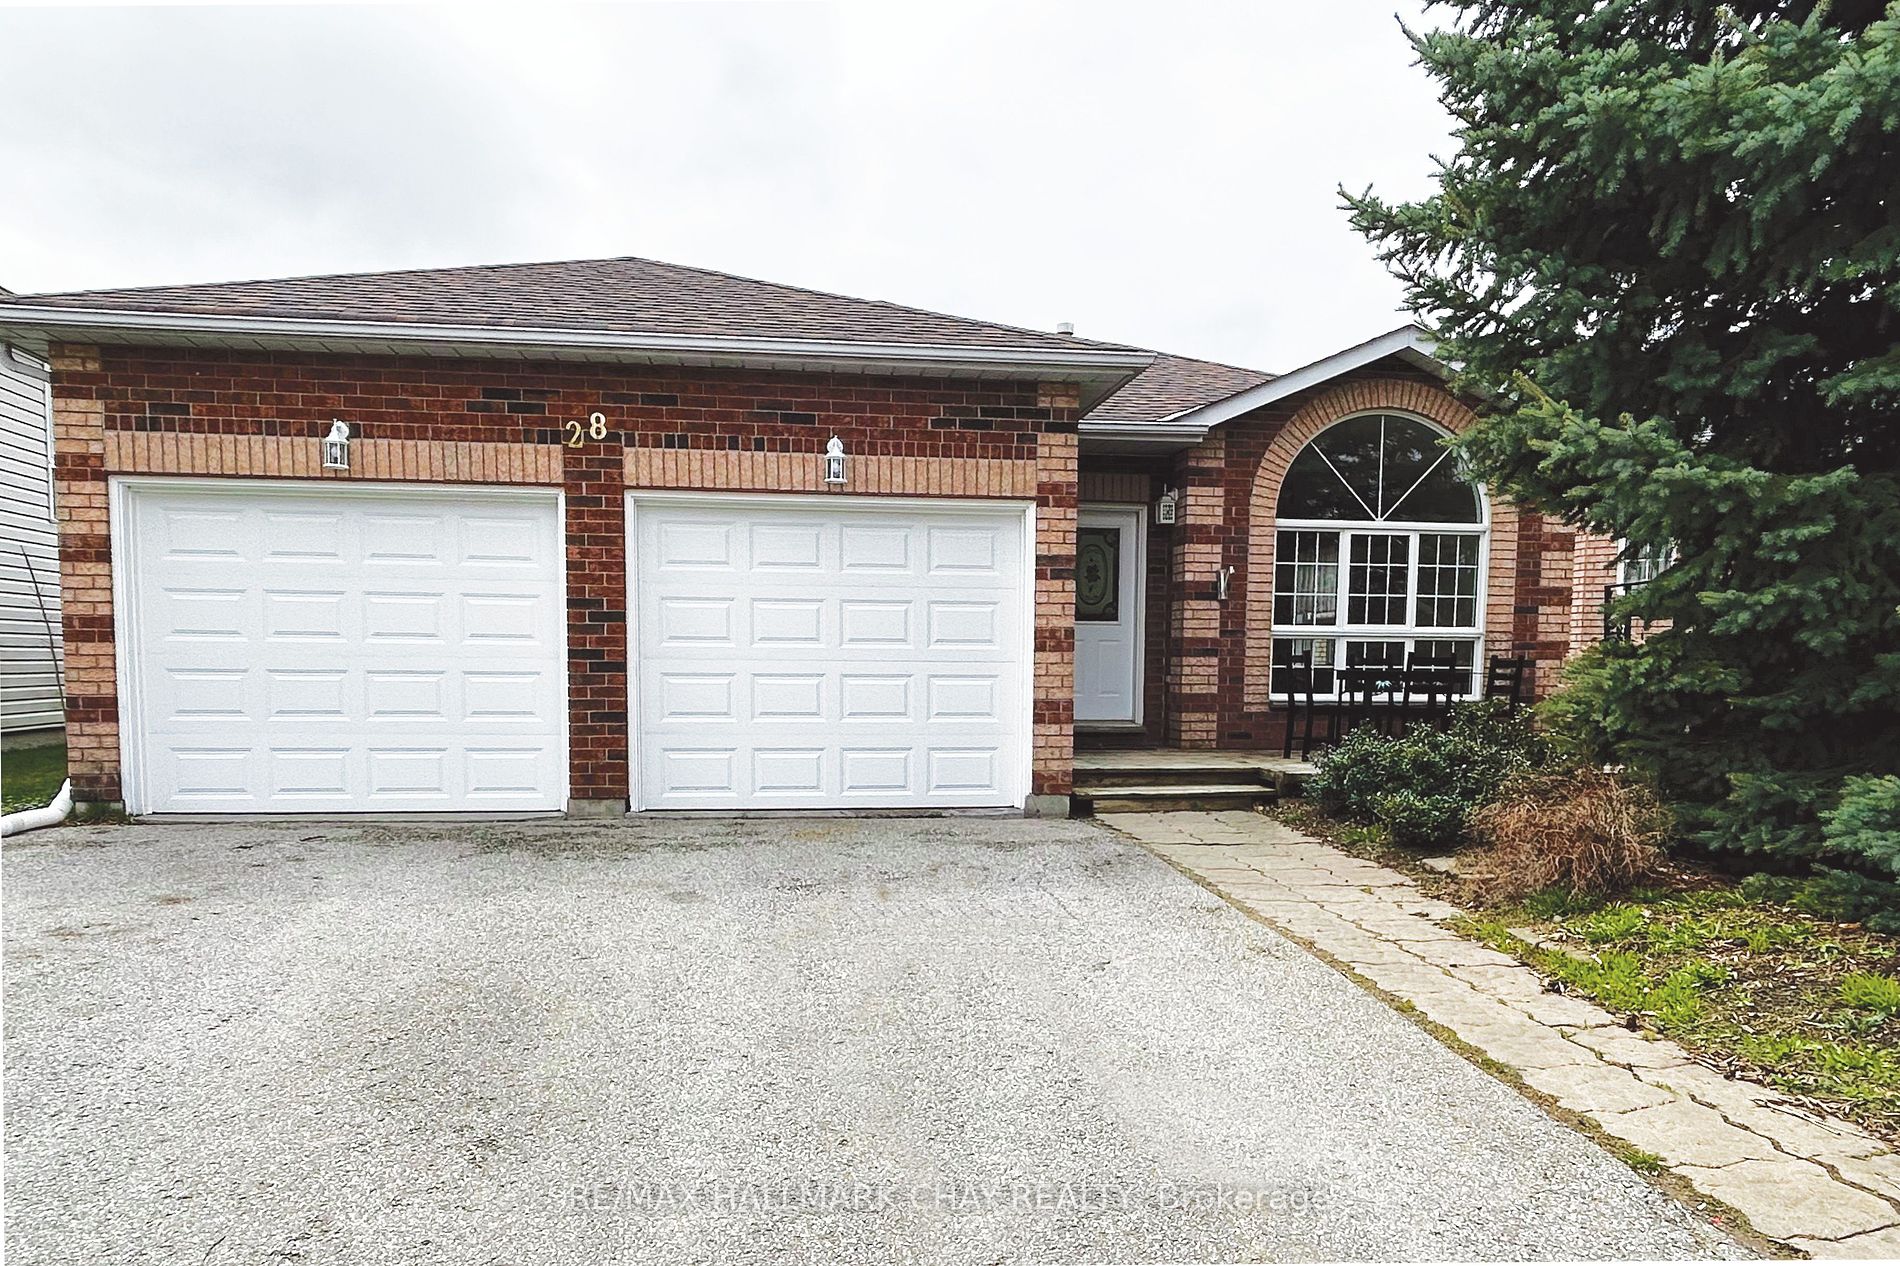 Detached house for sale at 28 Ritchie Cres Springwater Ontario